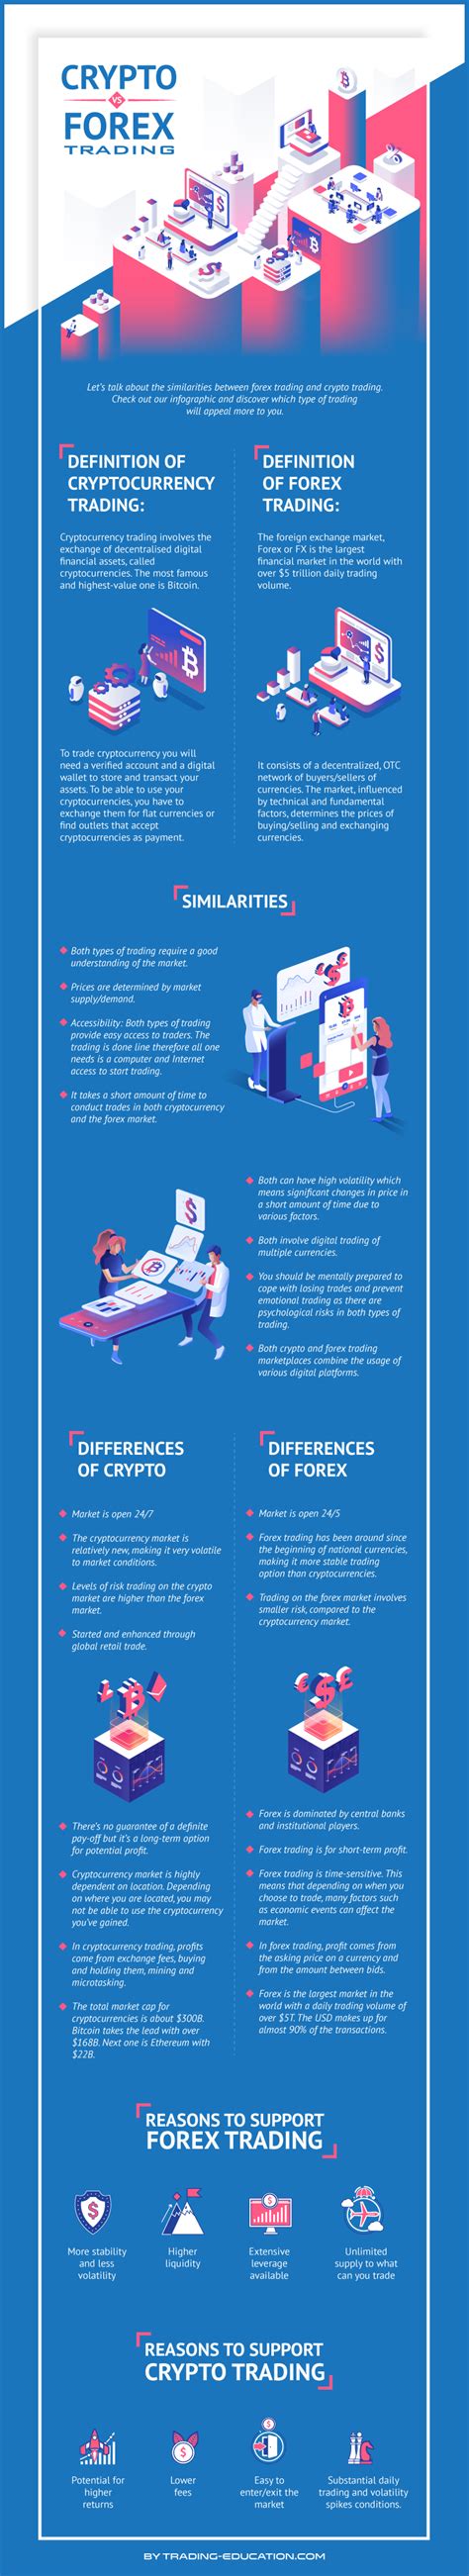 Compare forex vs crypto assets: Similarities and Differences Between Crypto and Forex ...